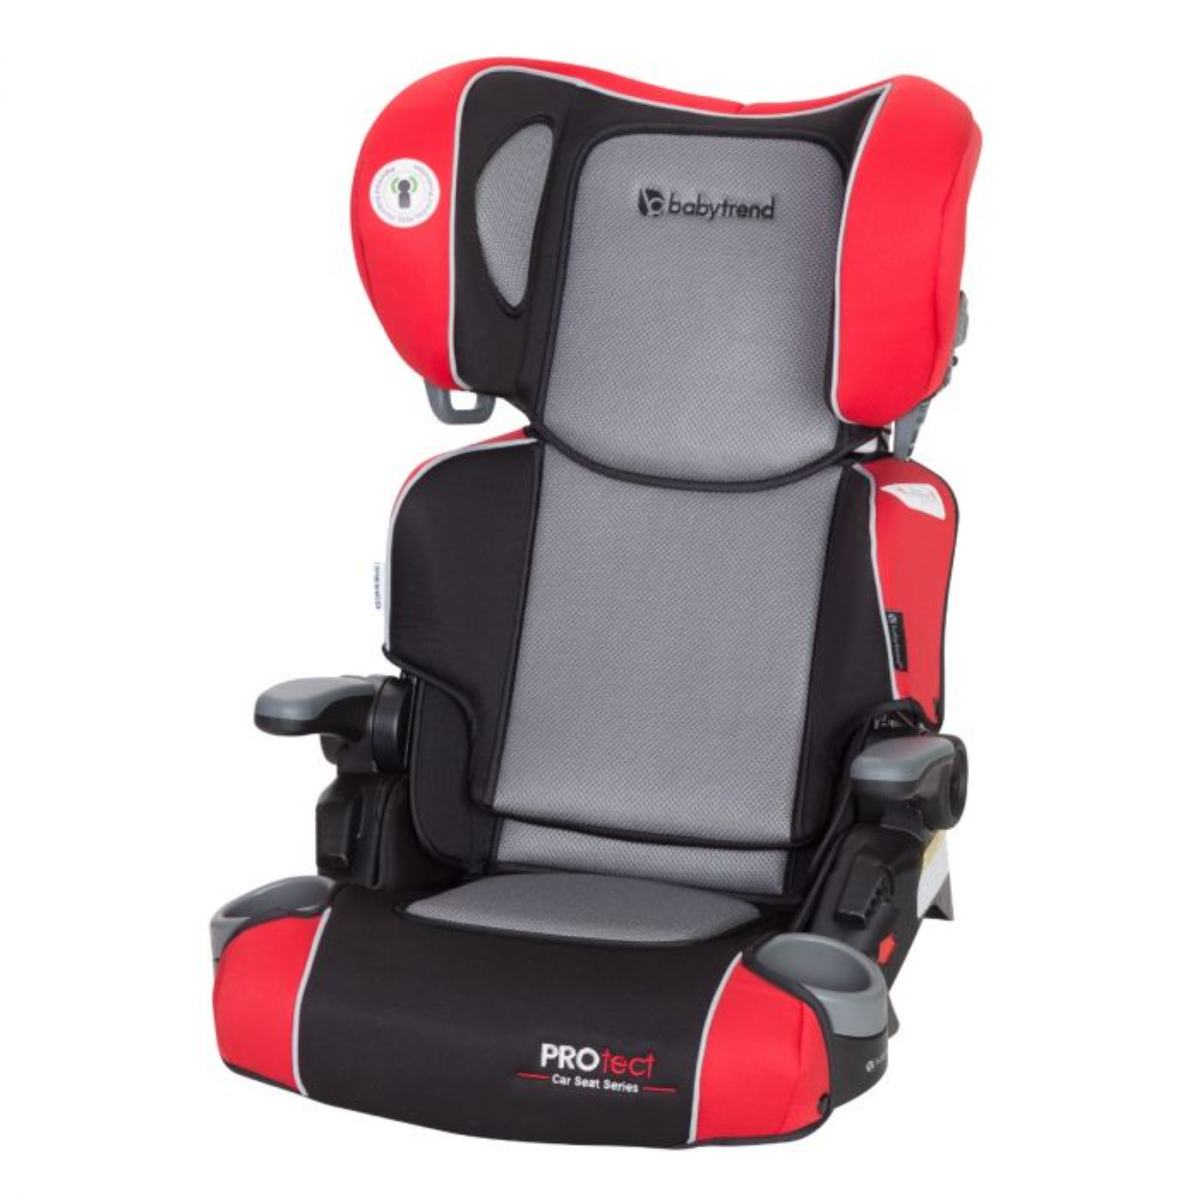 protect-car-seat-series-yumi-2-in-1-folding-booster-seat-riley